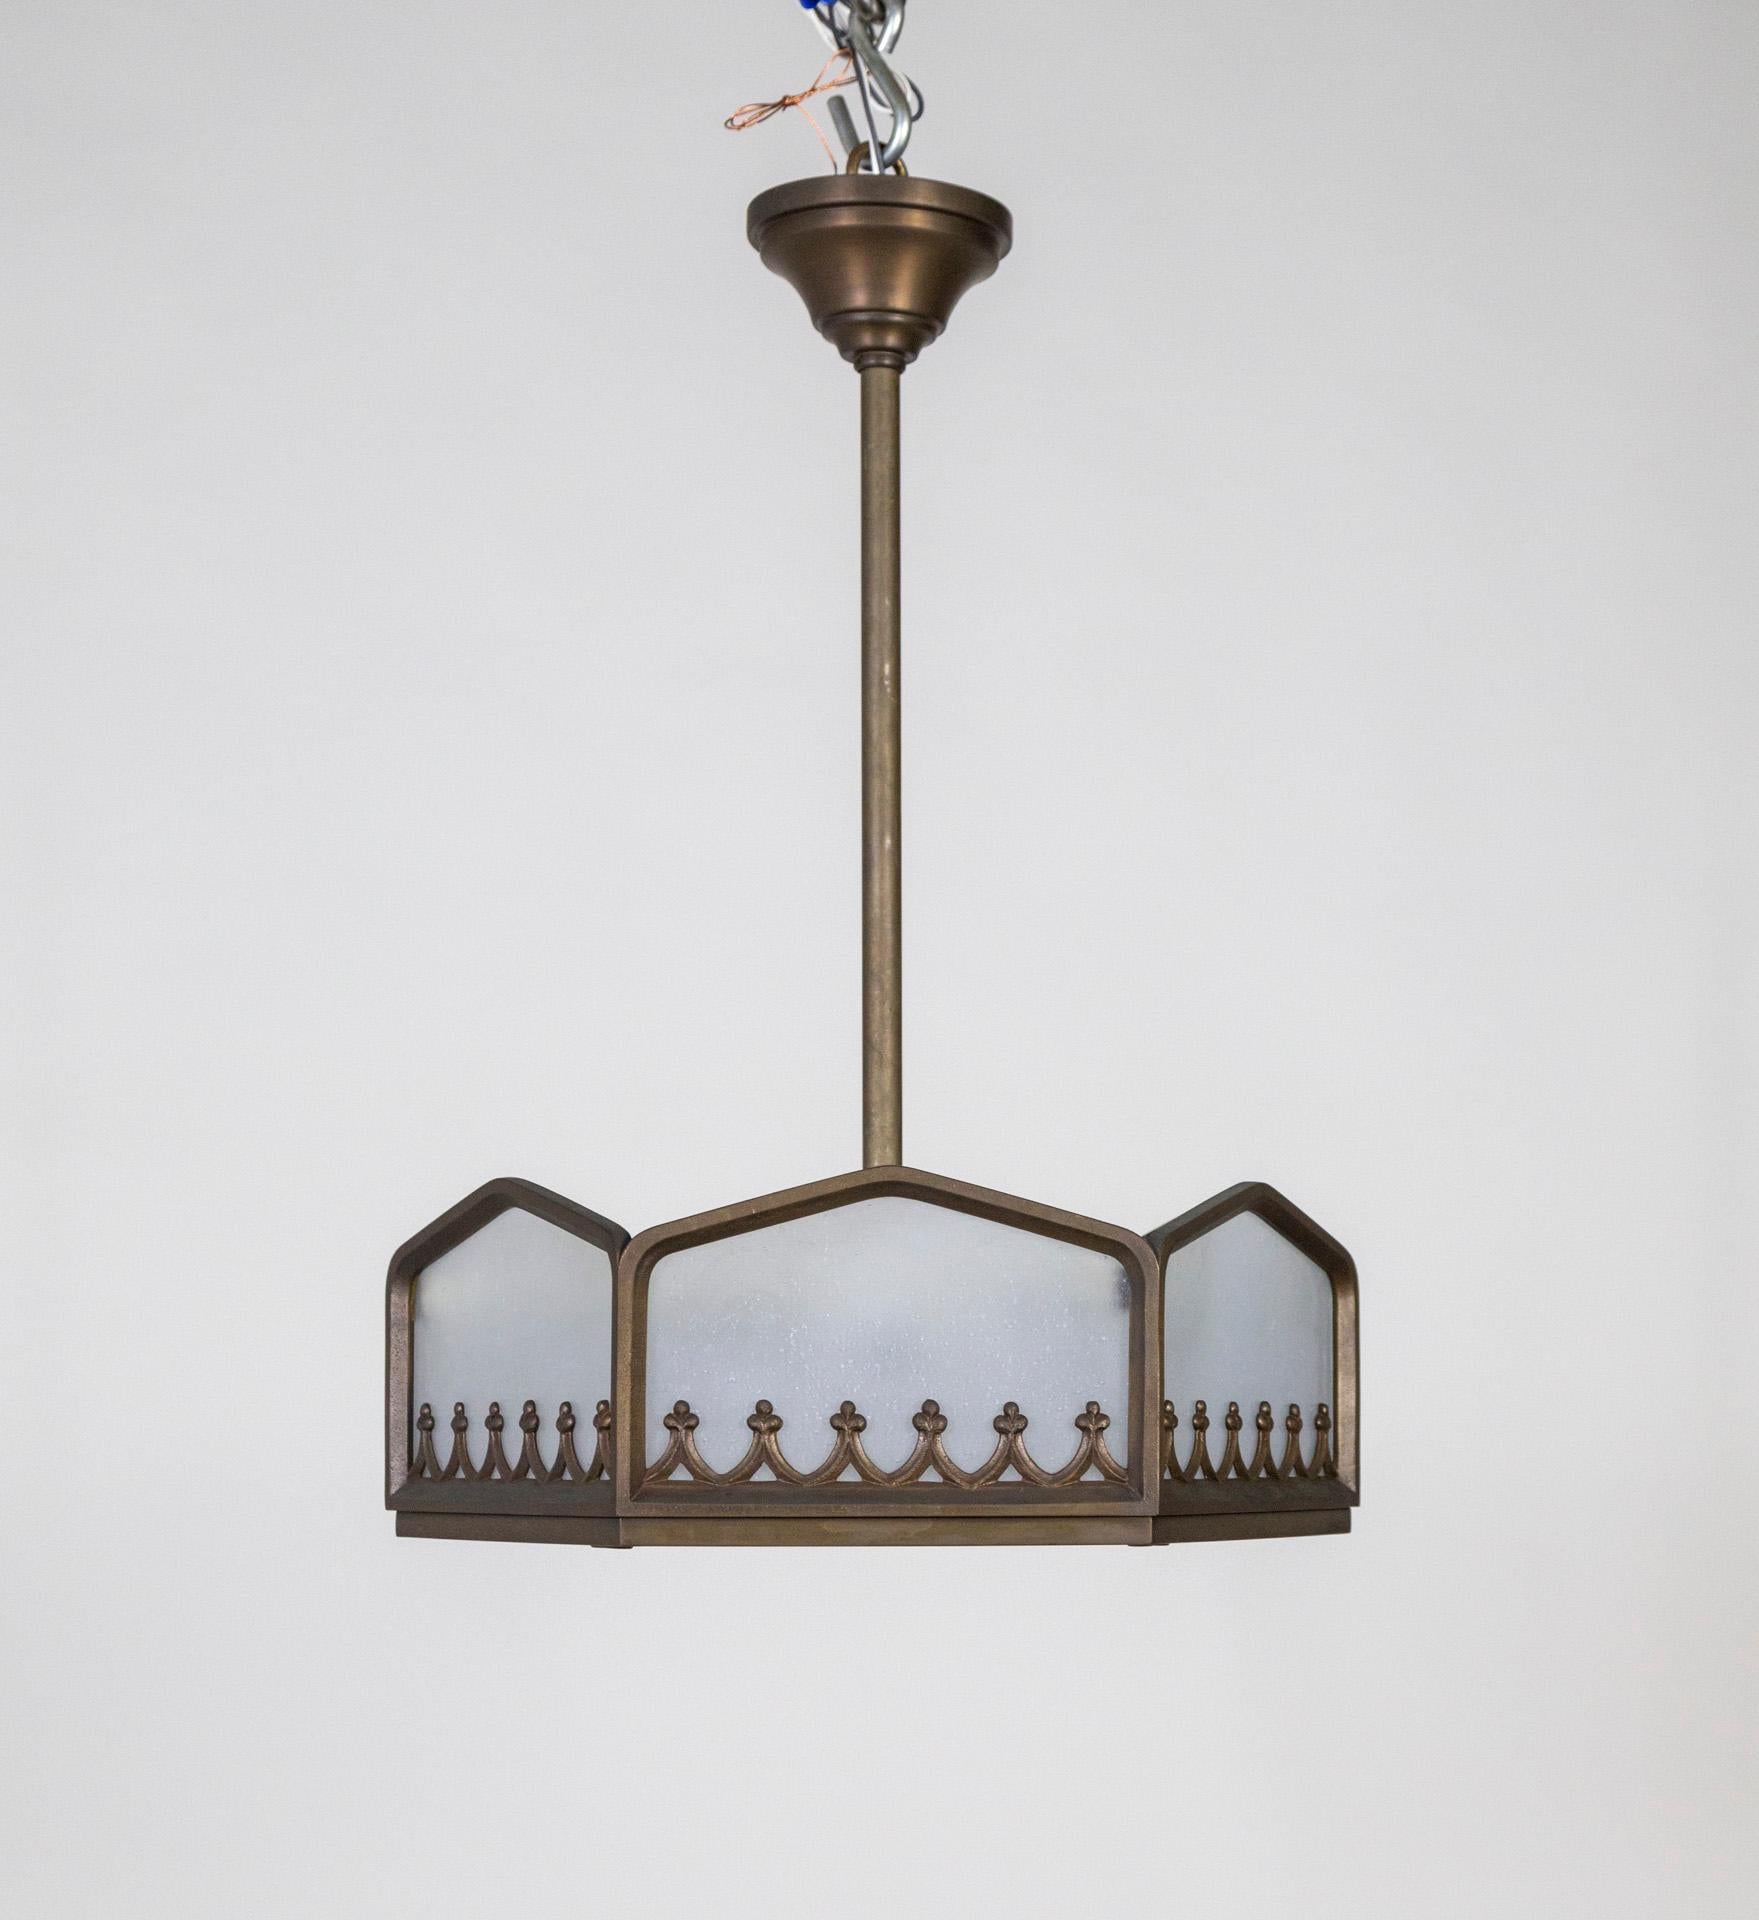 A cast, darkened brass, six sided frame holding poured glass panels, including a bottom diffuser. The structure has a weighty, wrought iron look; with scrolls and foliate. The glass is frosted and seeded. Beautifully proportioned, with a timeless